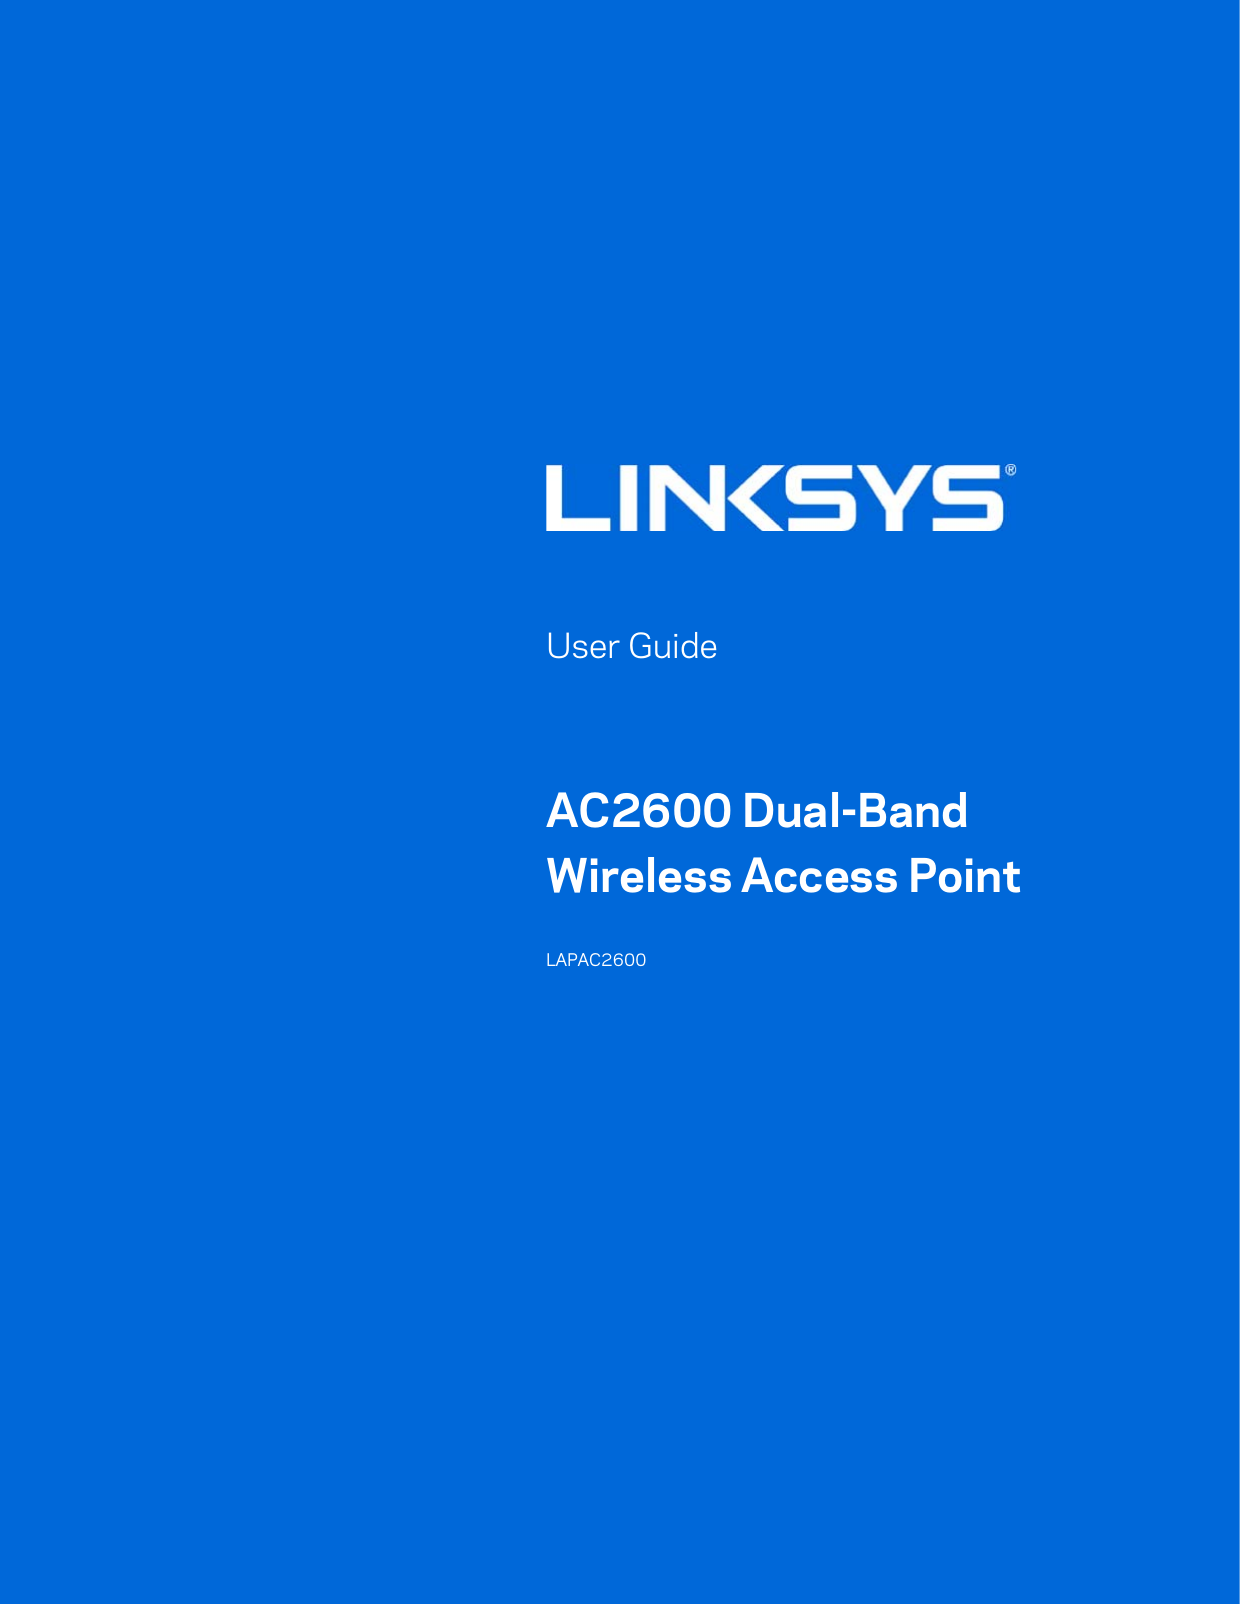           User Guide  AC2600 Dual-Band Wireless Access Point  LAPAC2600   1